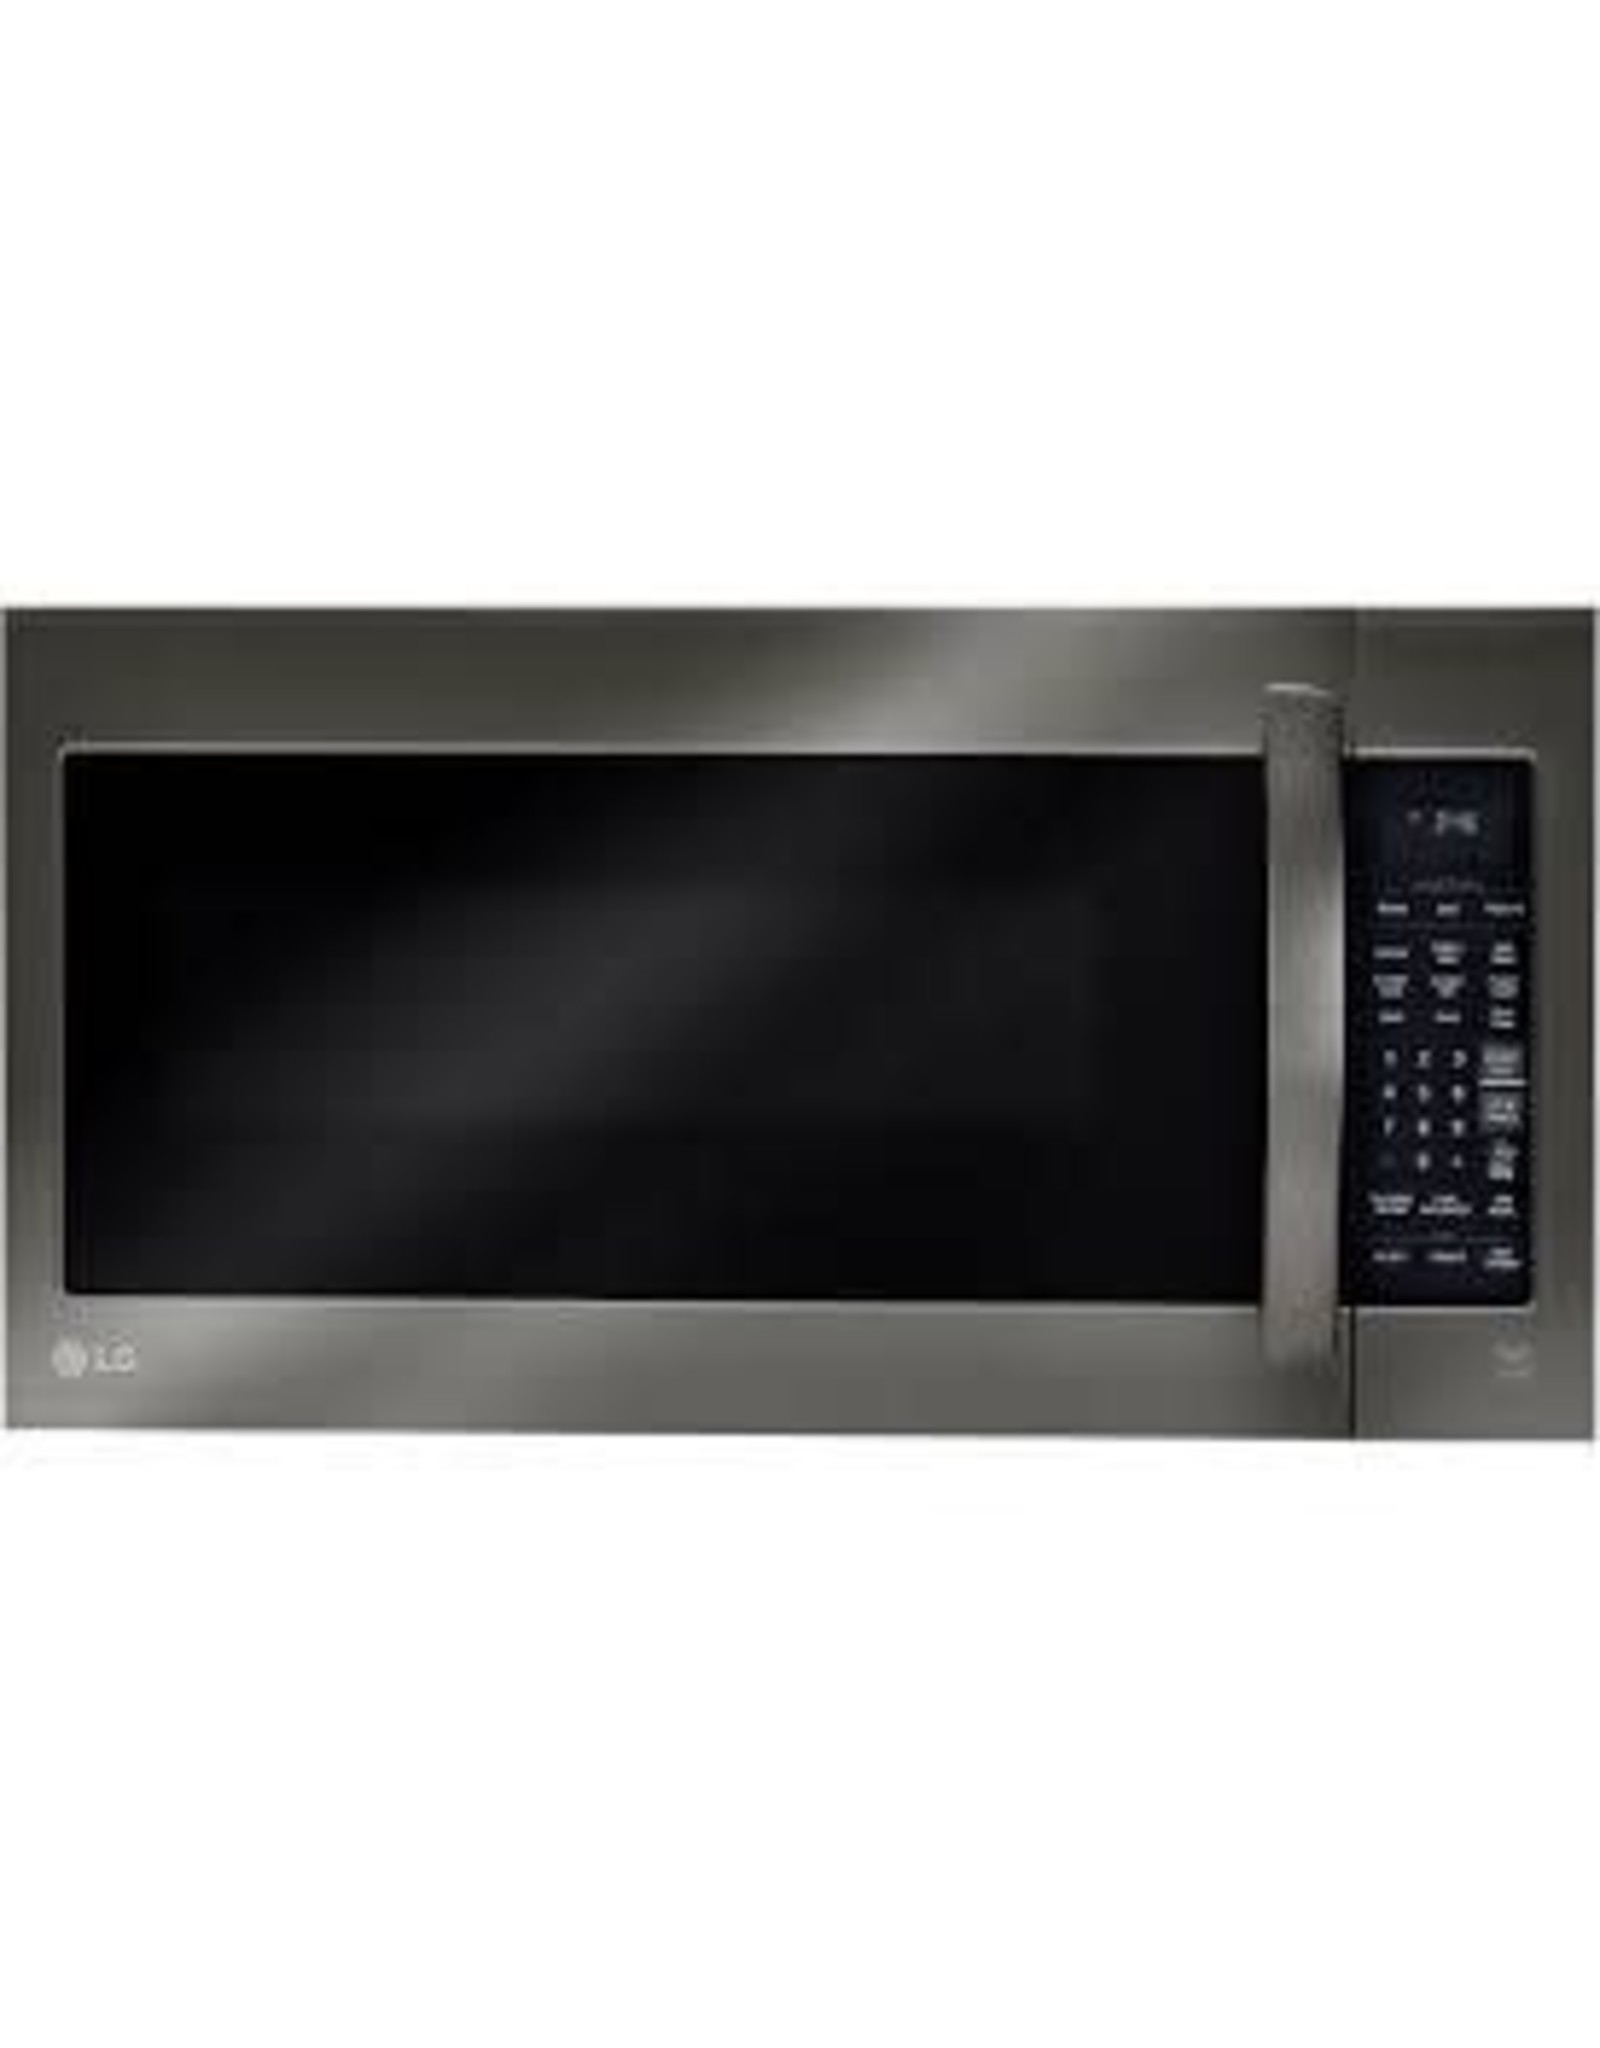 2.0 cu. ft. Over the Range Microwave in Black Stainless Steel with EasyClean and Sensor Cook LMV2031BD